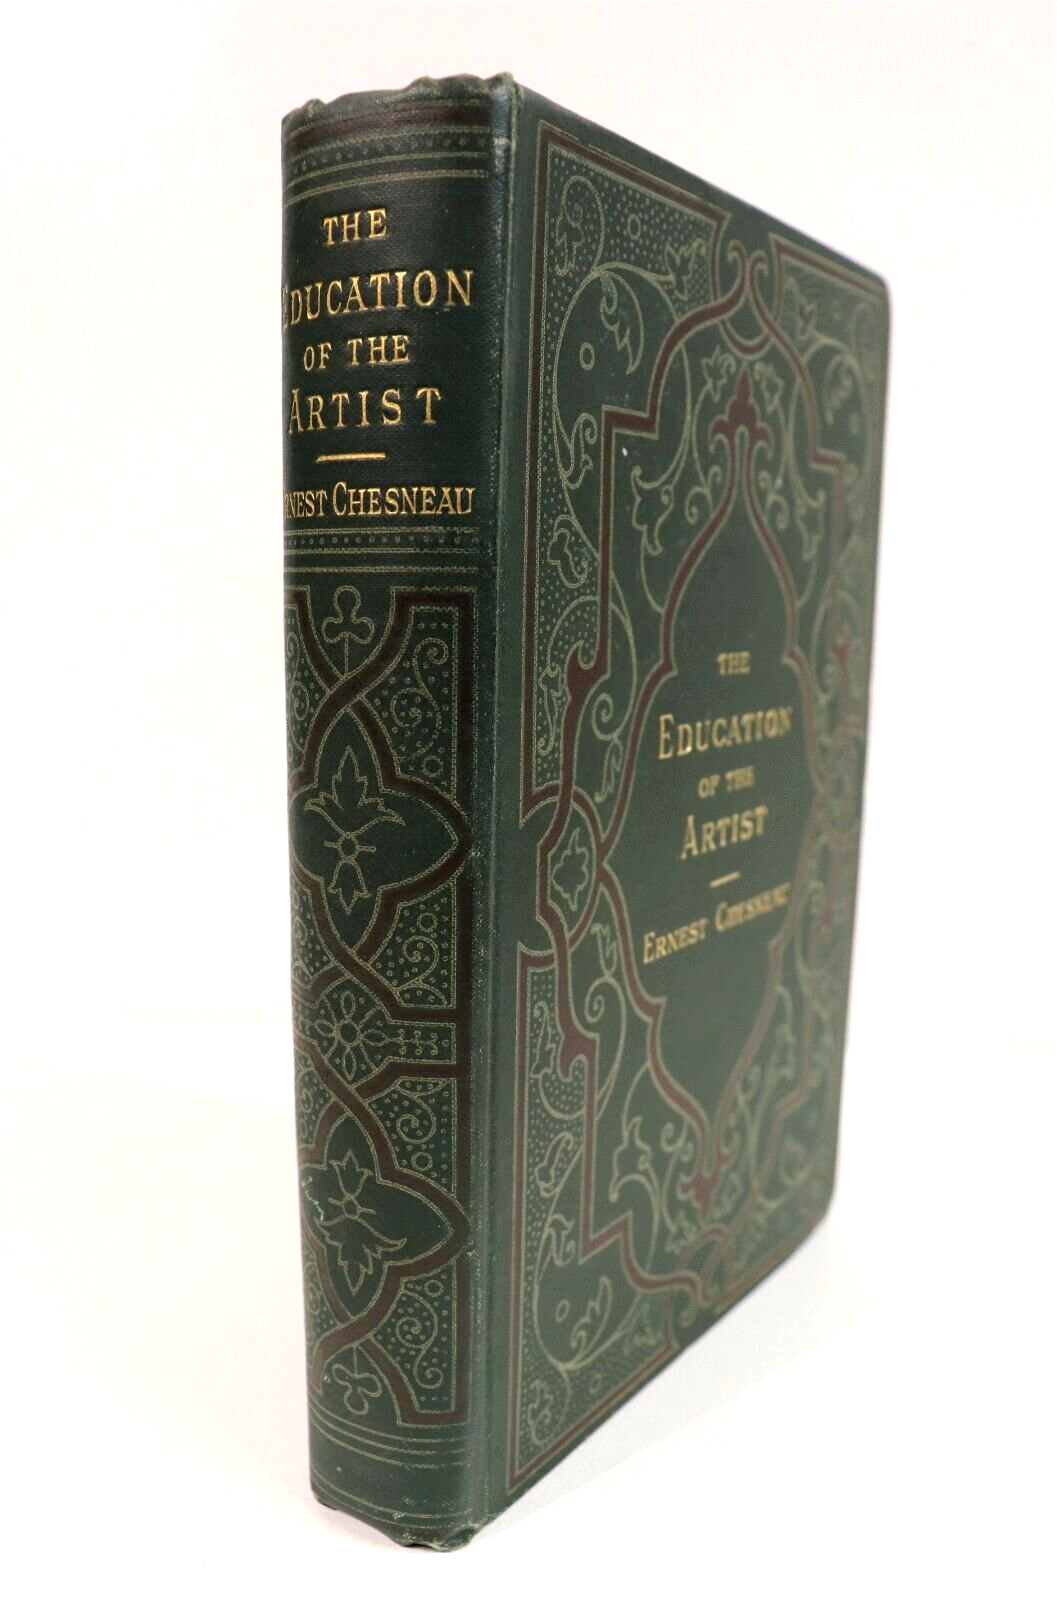 The Education Of The Artist by E. Chesneau - 1886 - Antiquarian Art Book